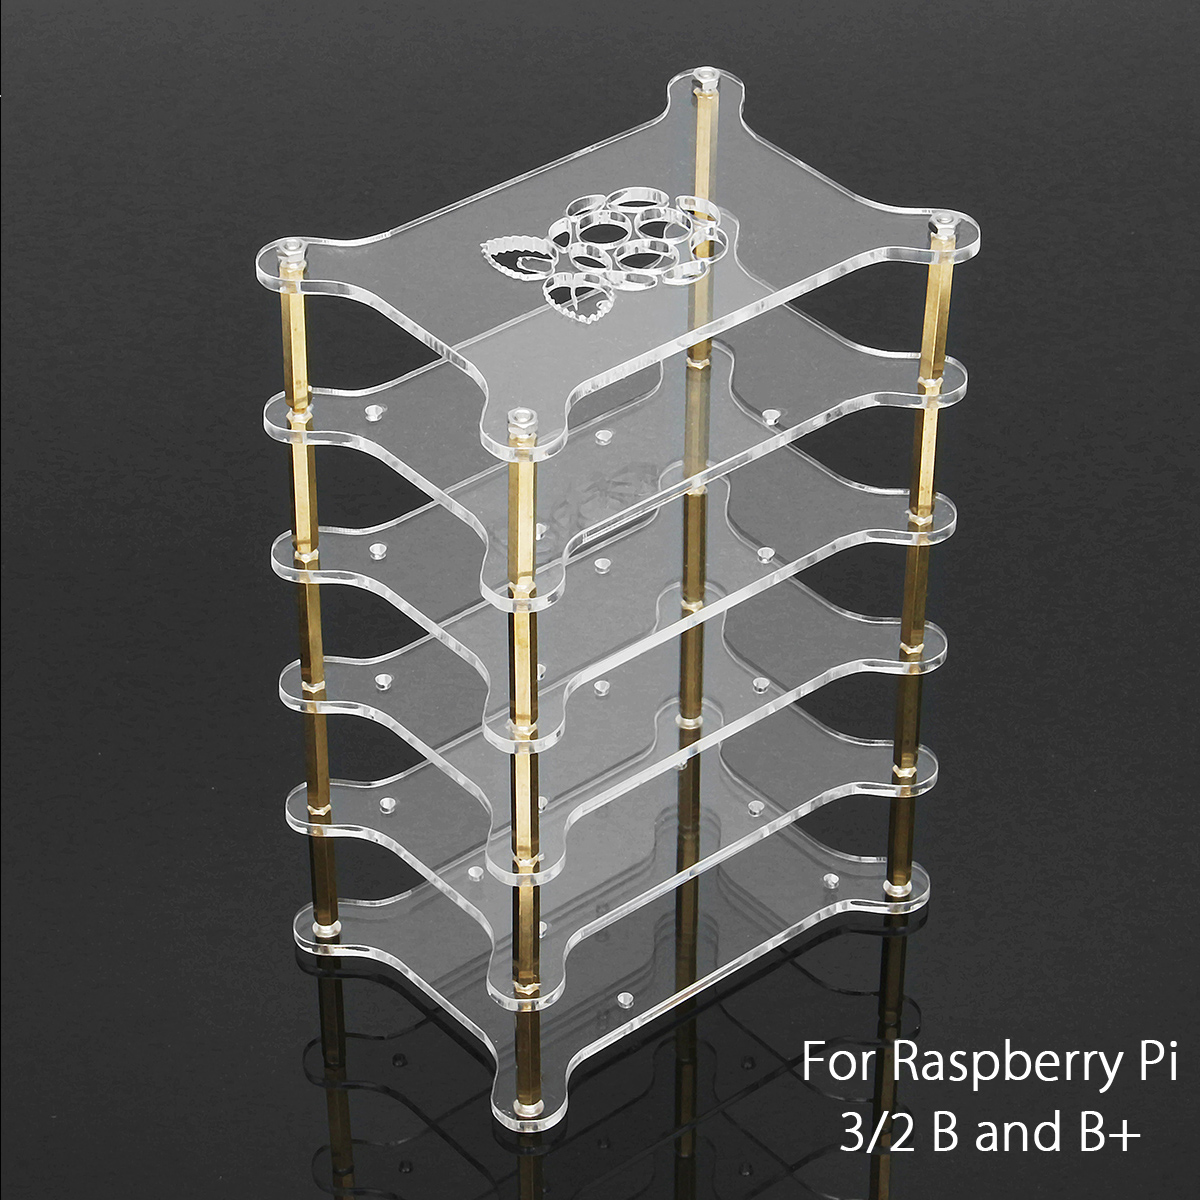 Clear Acrylic 5 Layer Cluster Case Shelf Stack For Raspberry Pi 3/2 B and B+ 8